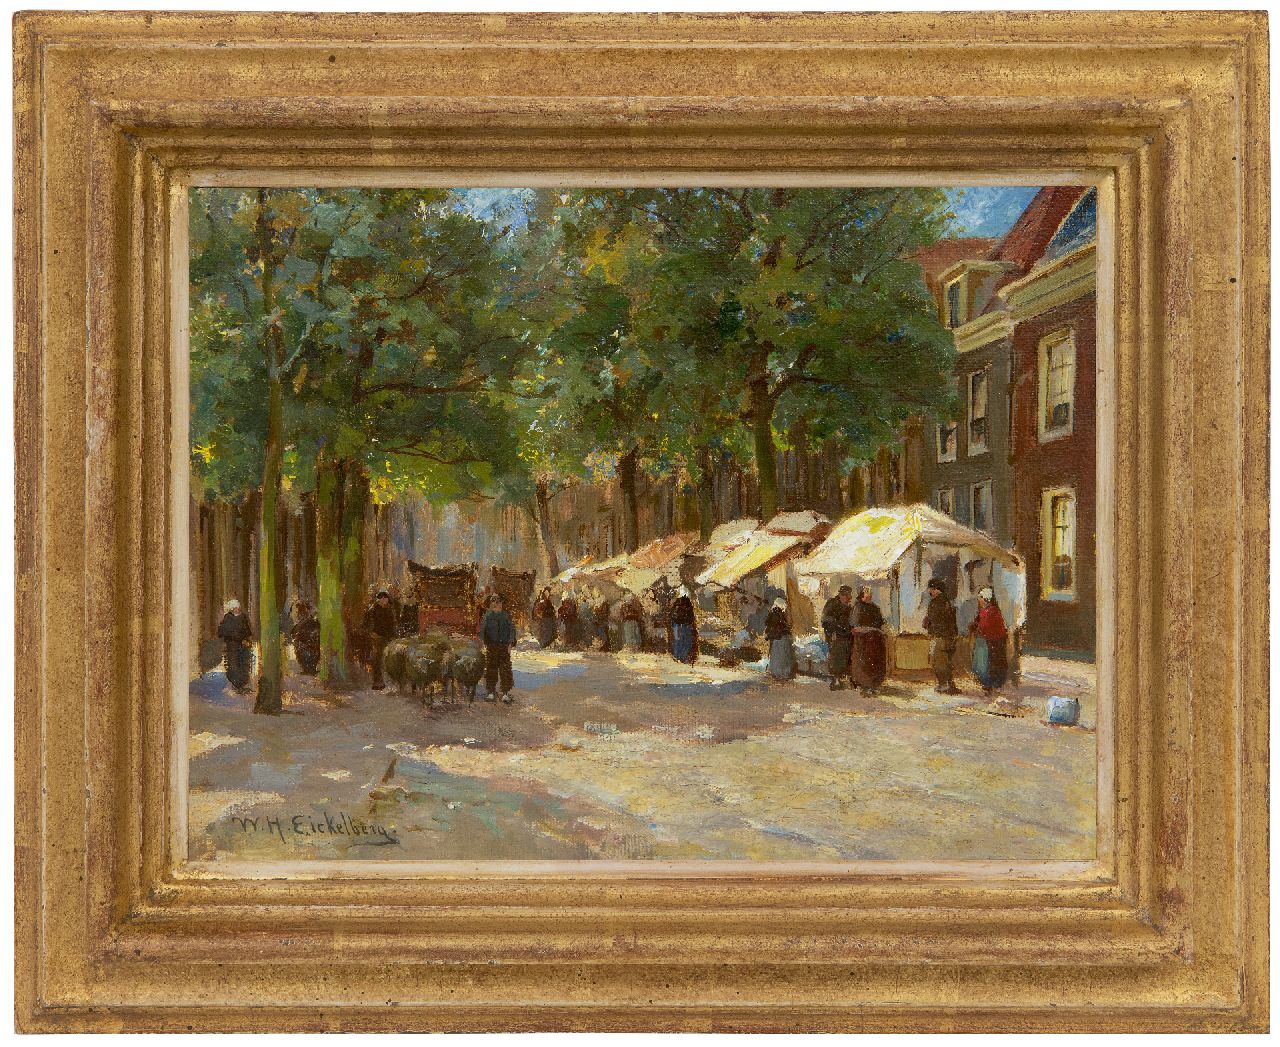 Eickelberg W.H.  | Willem Hendrik Eickelberg, Market under the trees, oil on canvas 20.3 x 27.1 cm, signed l.l.